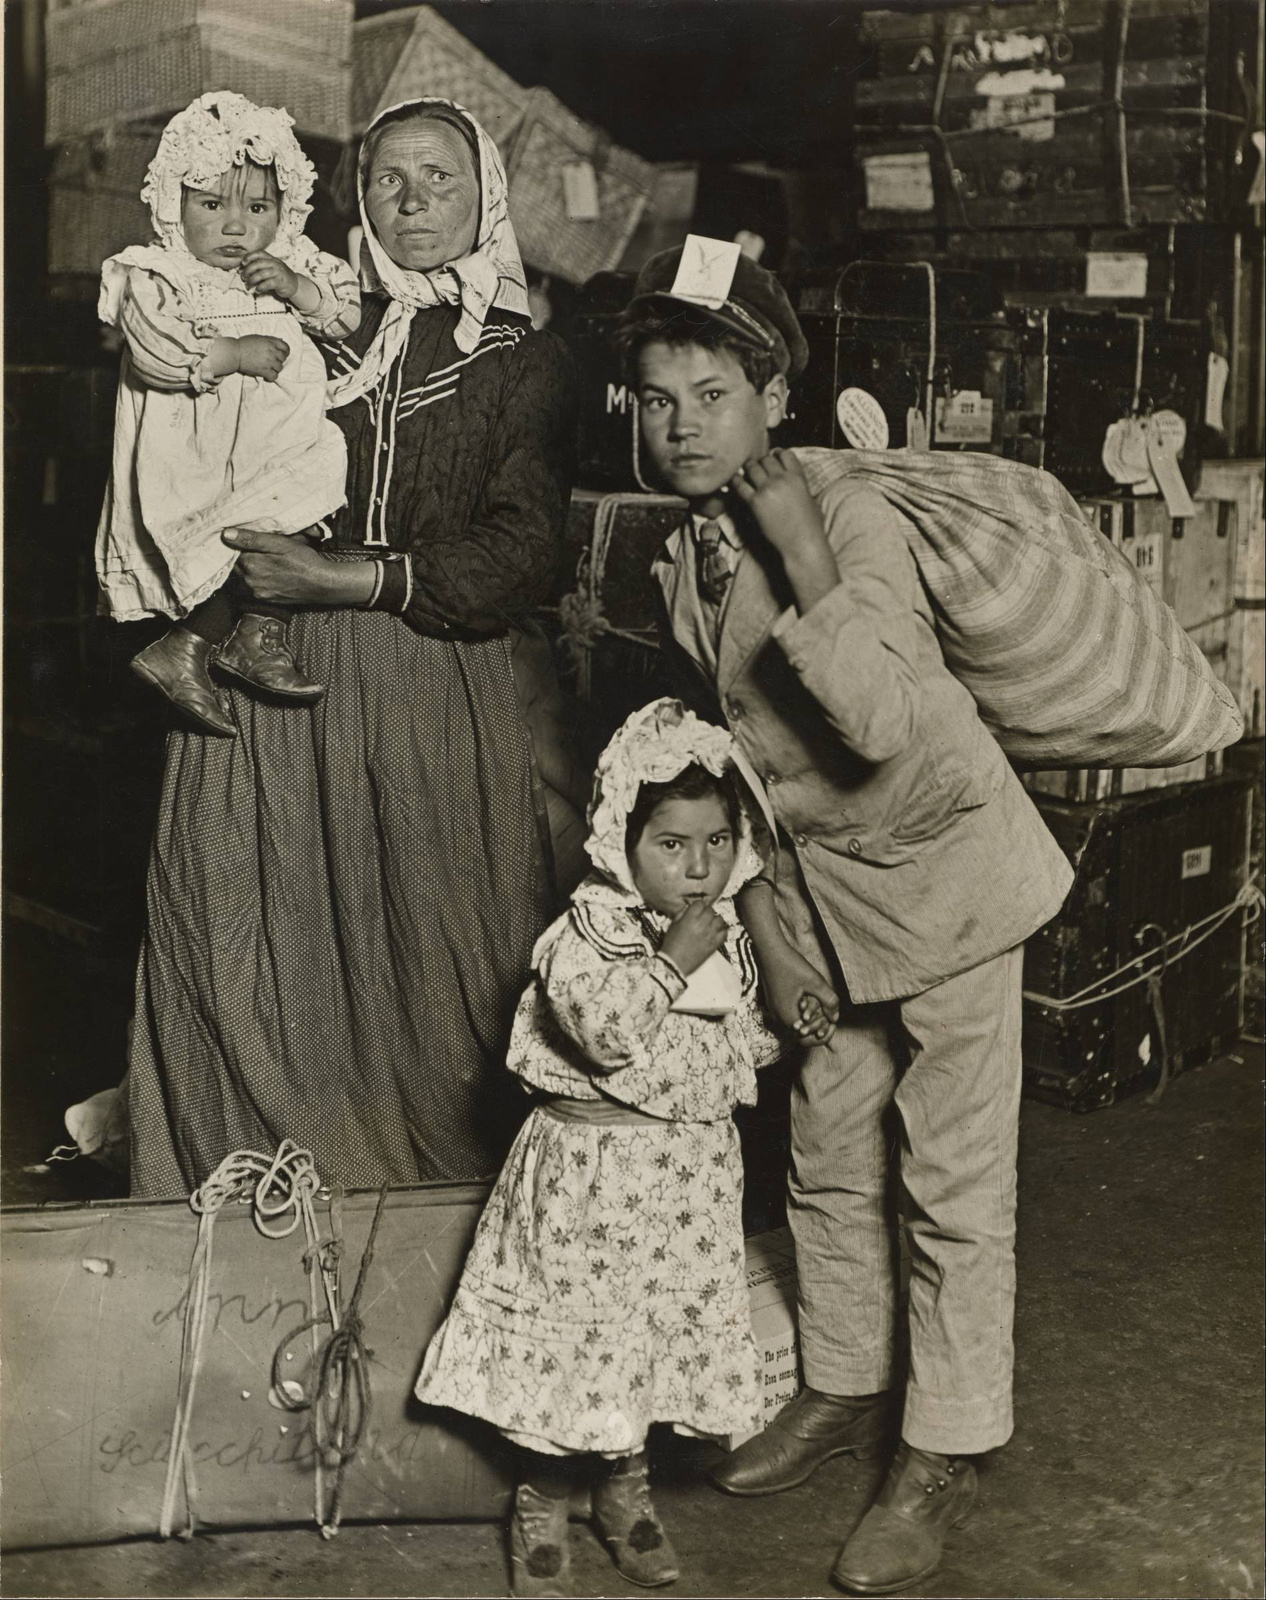 Old photograph of an Italian family